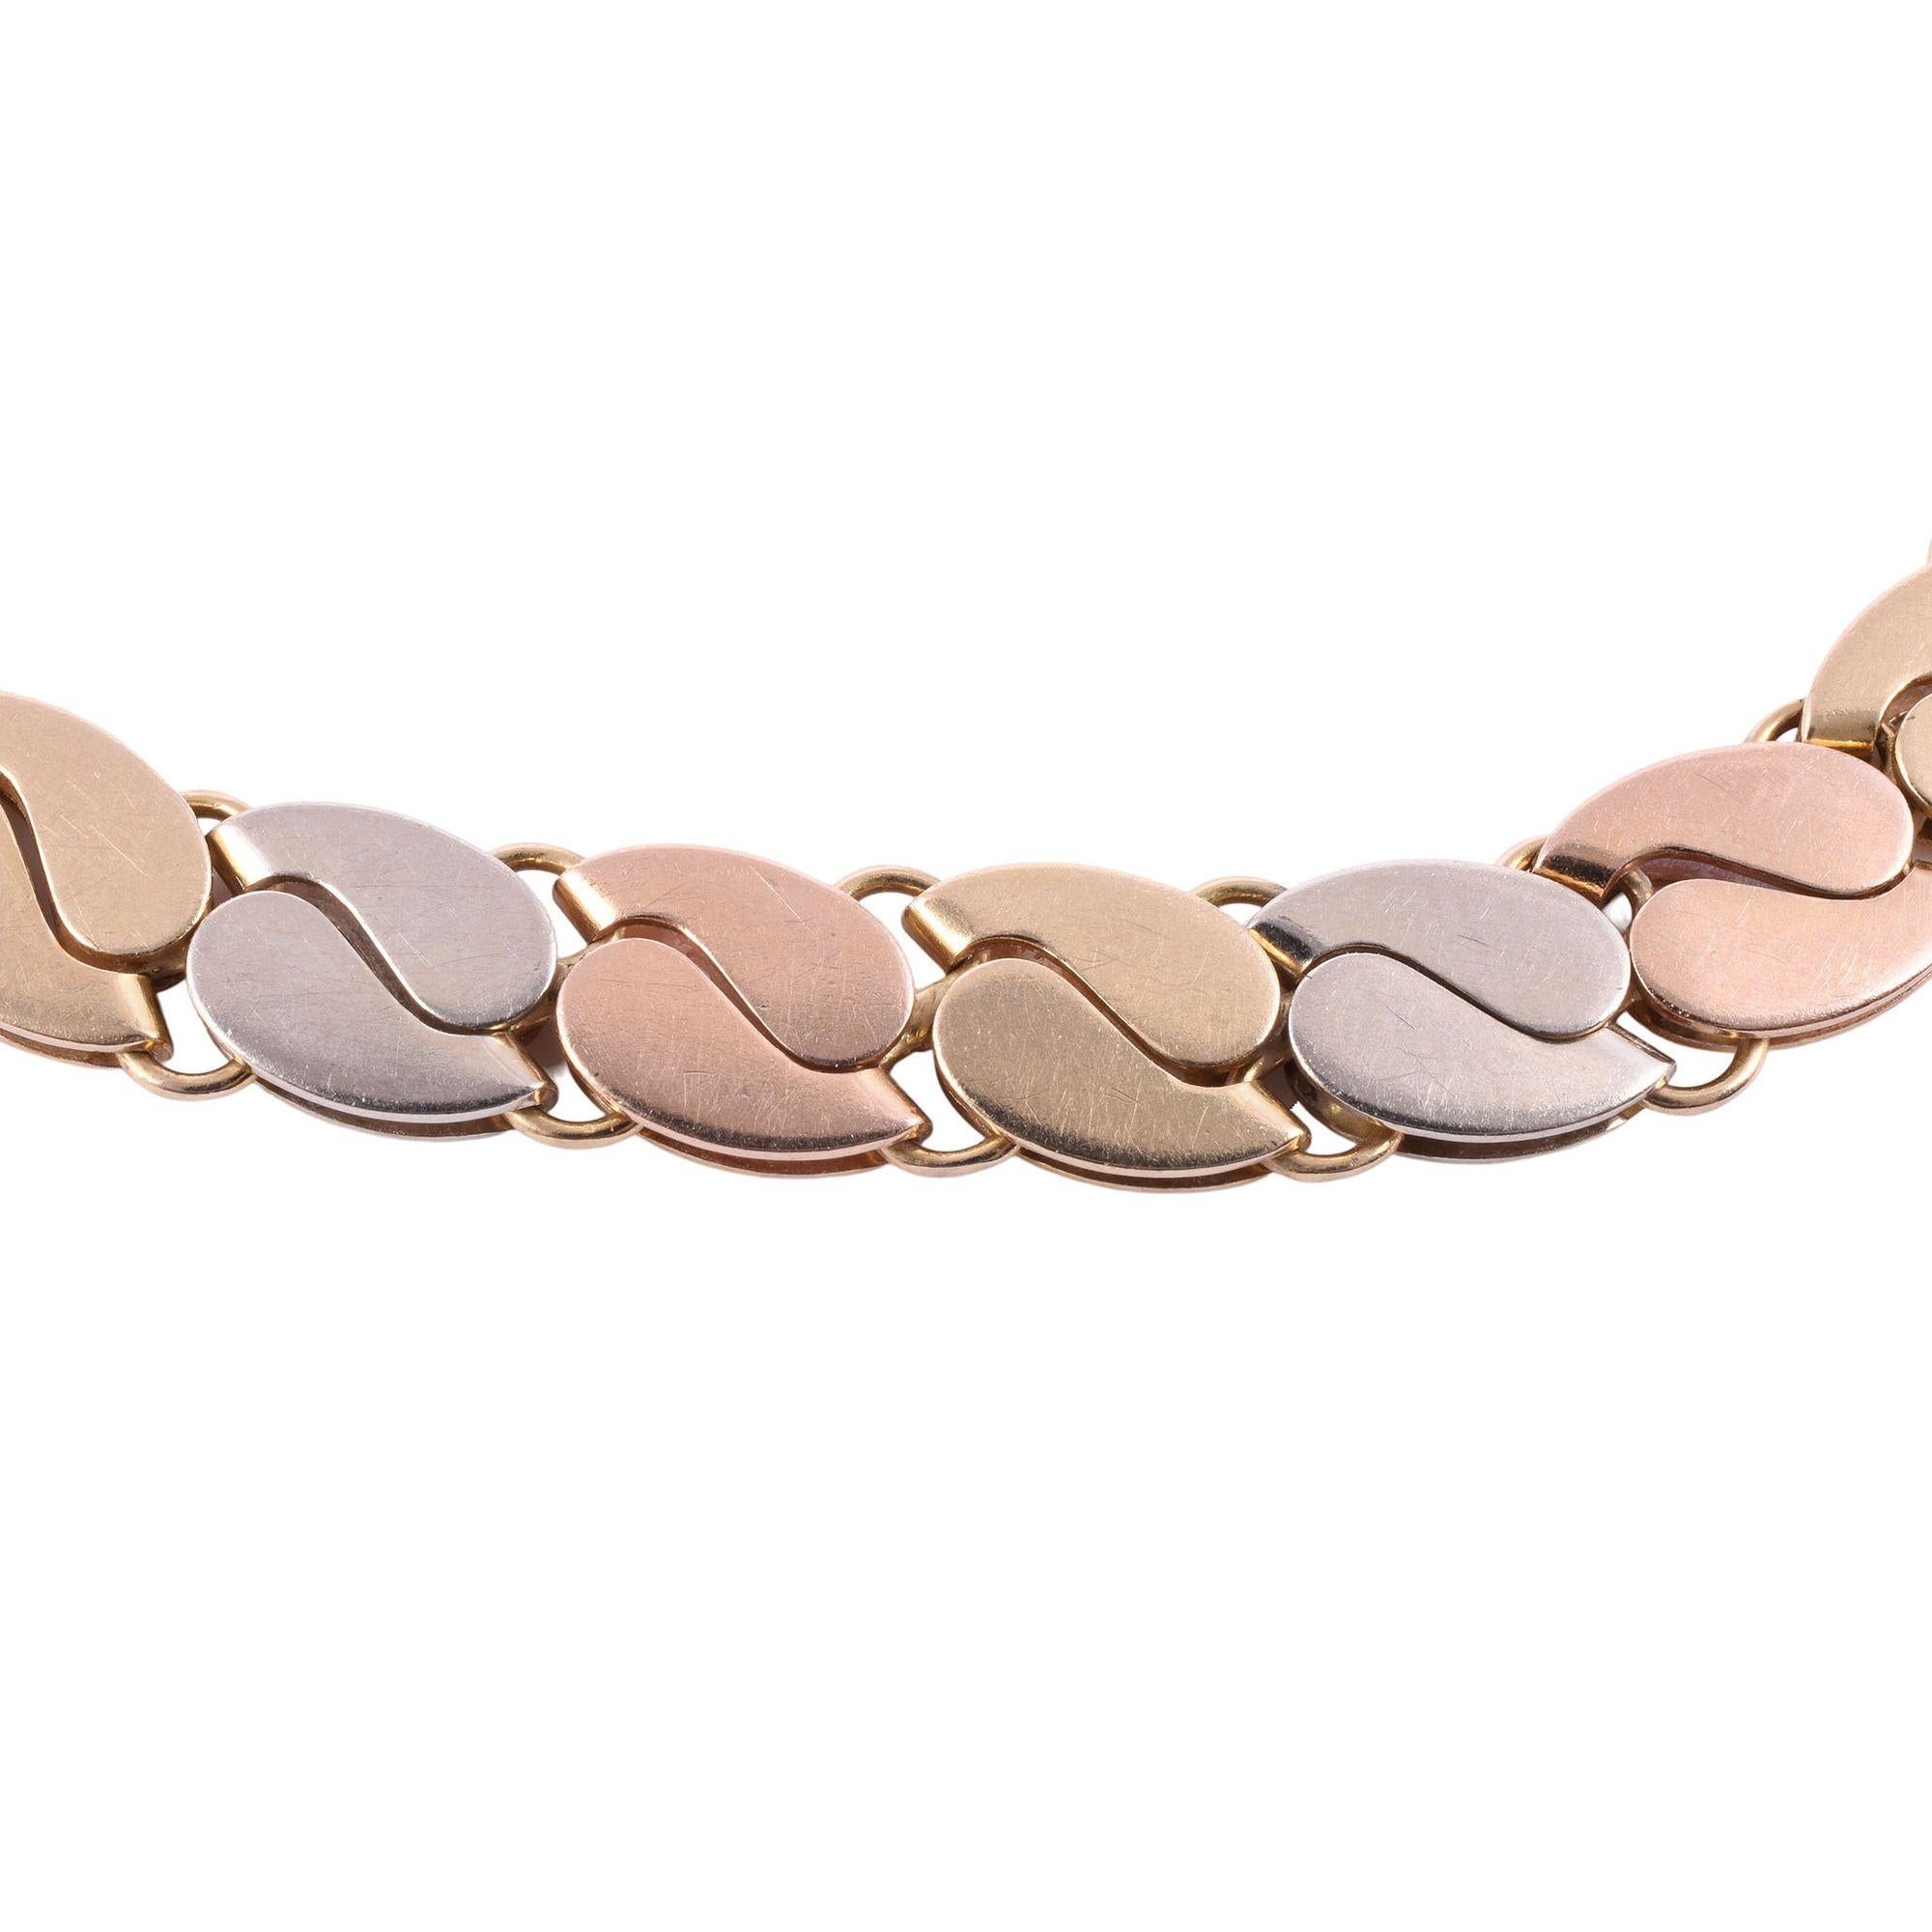 Estate Italian Chimento 18K tri color gold bracelet, circa 1980. This fancy link bracelet by Chimento is crafted in 18 karat yellow, white, and rose gold. The three tone gold bracelet weighs 19.2 grams. [KIMH 564]
 
Dimensions
7.5″L